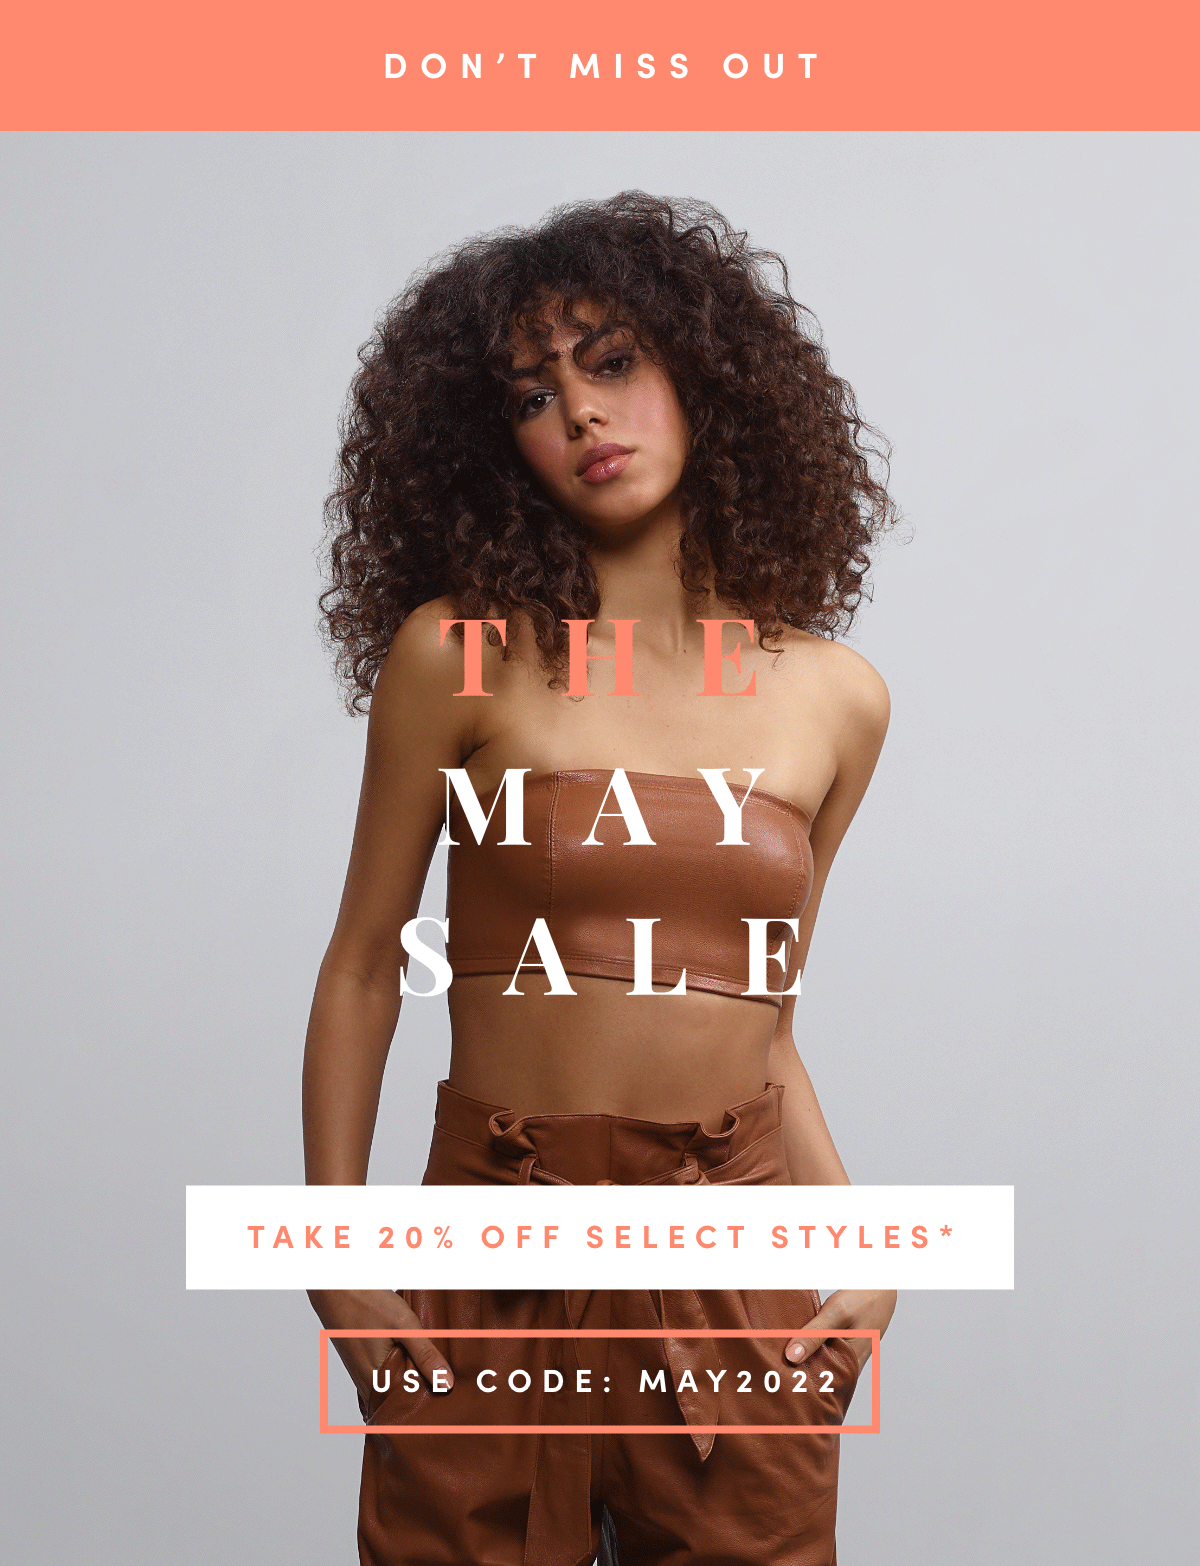 Don't Miss Out | The May Sale | Take 20% off select styles*